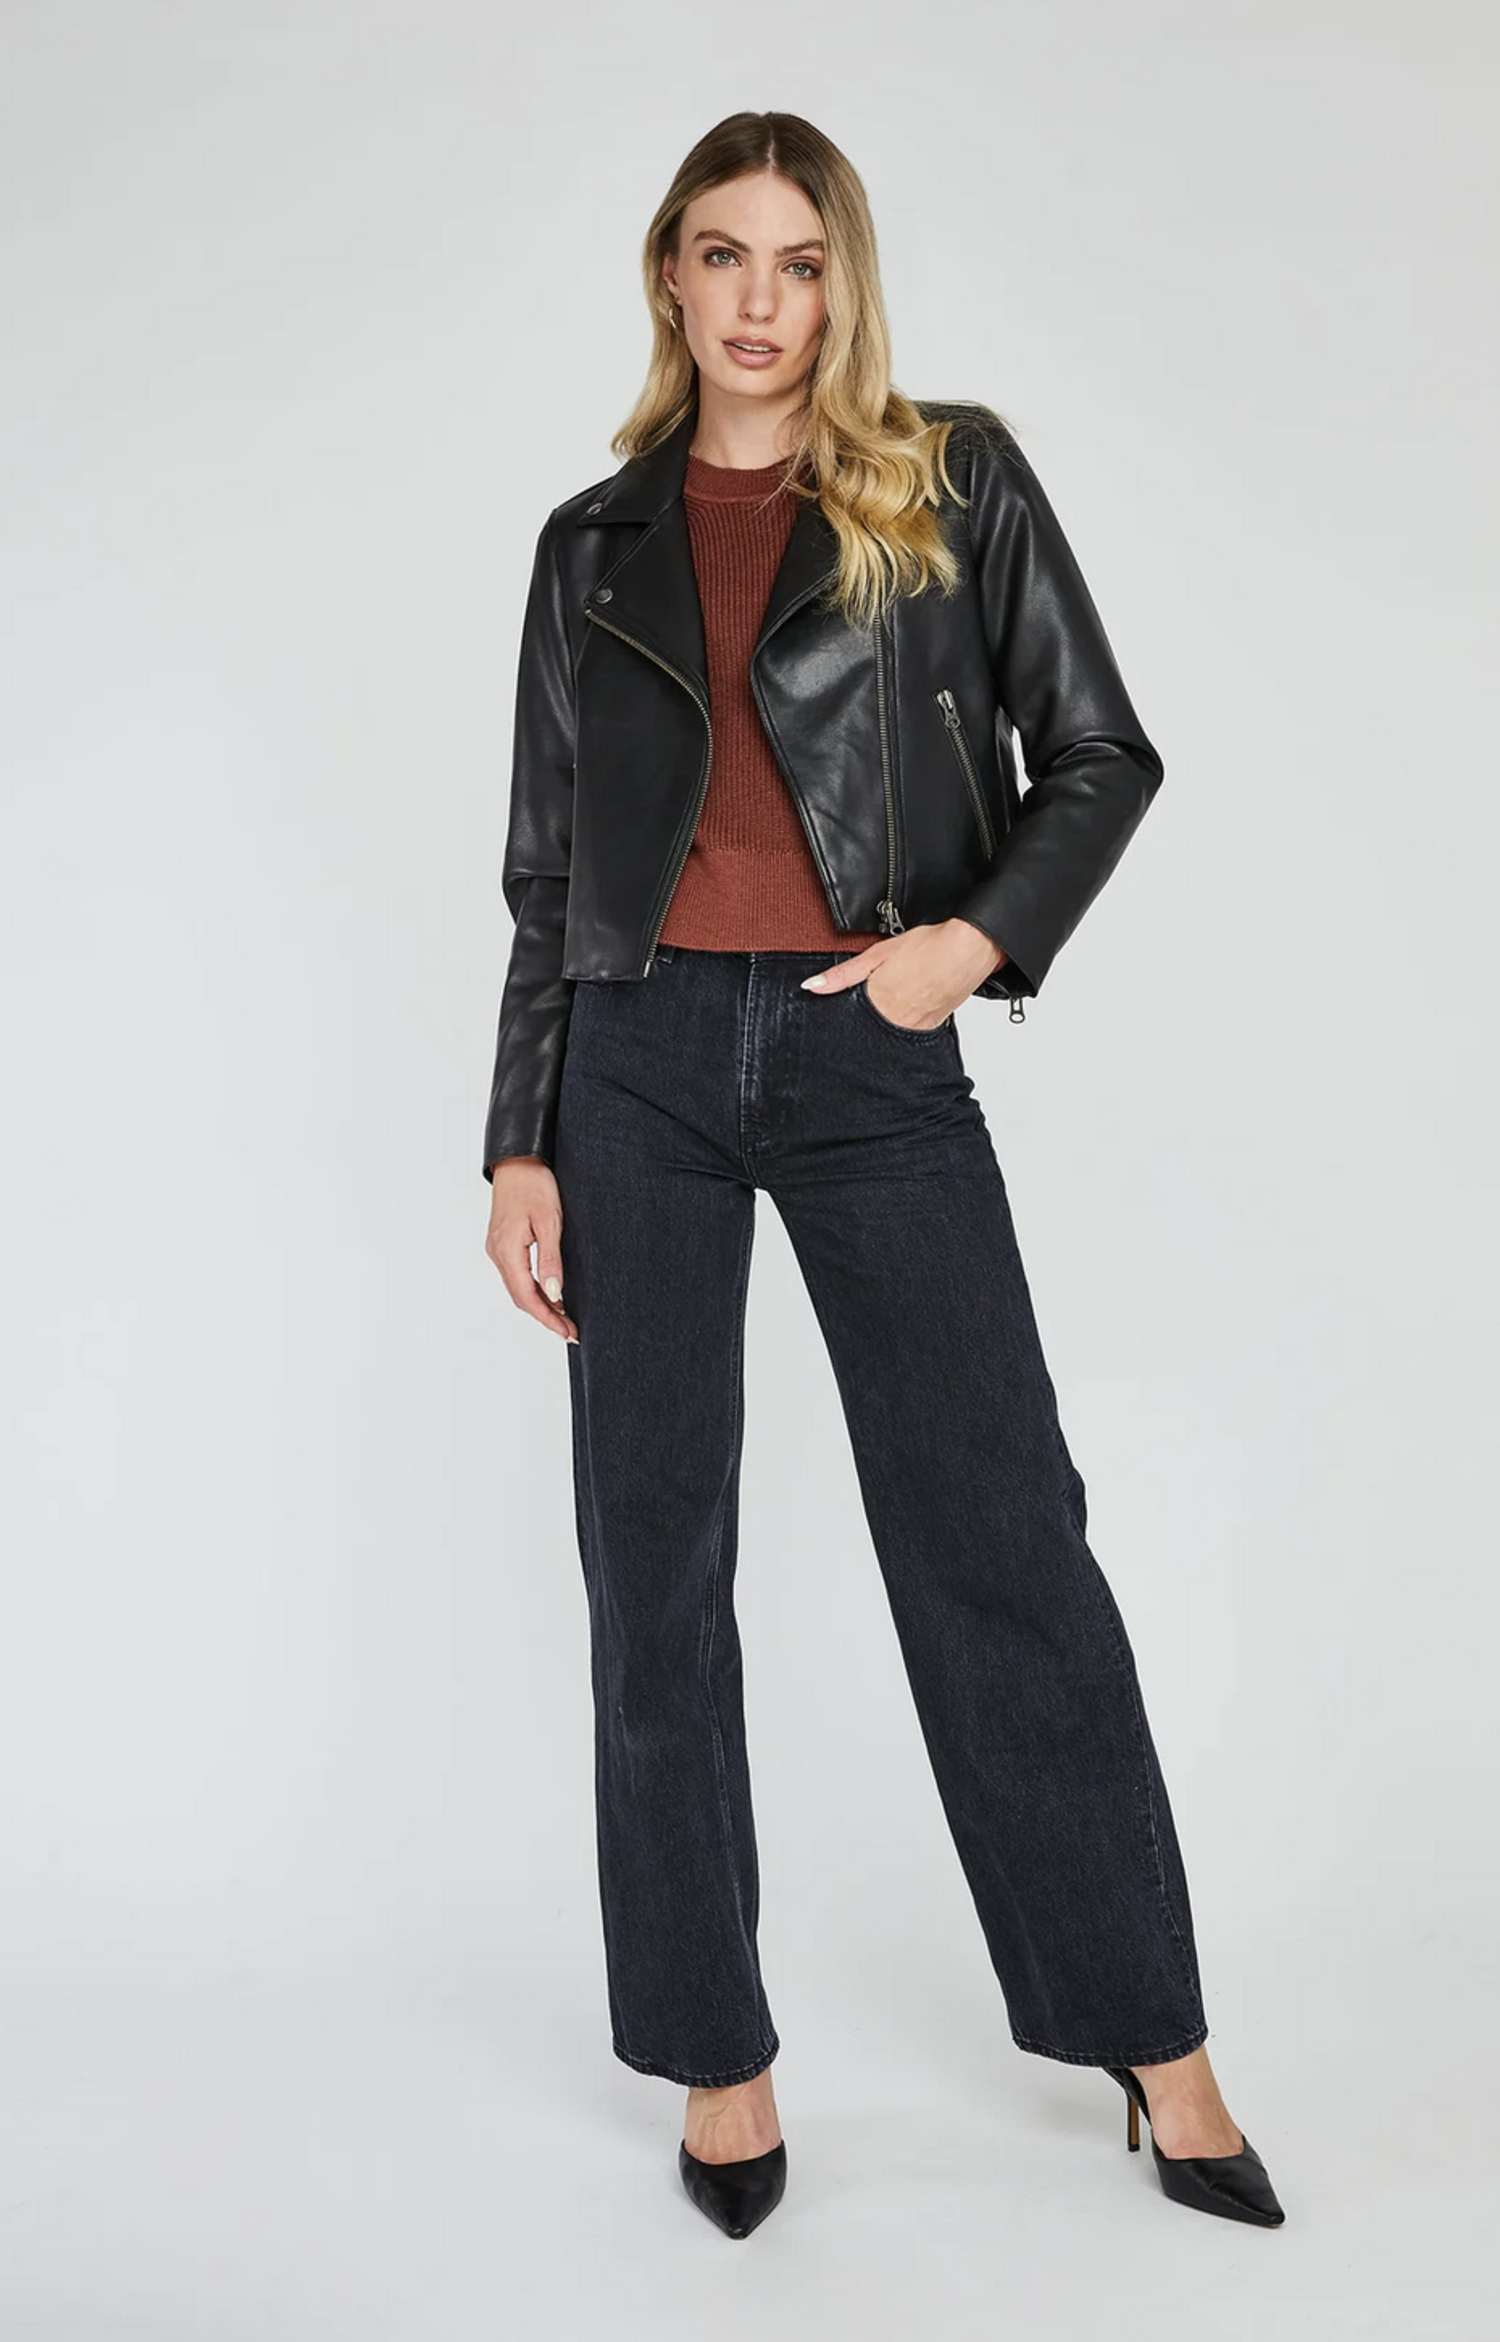 Genuine vs Faux Leather Jacket: Which Should I Choose?